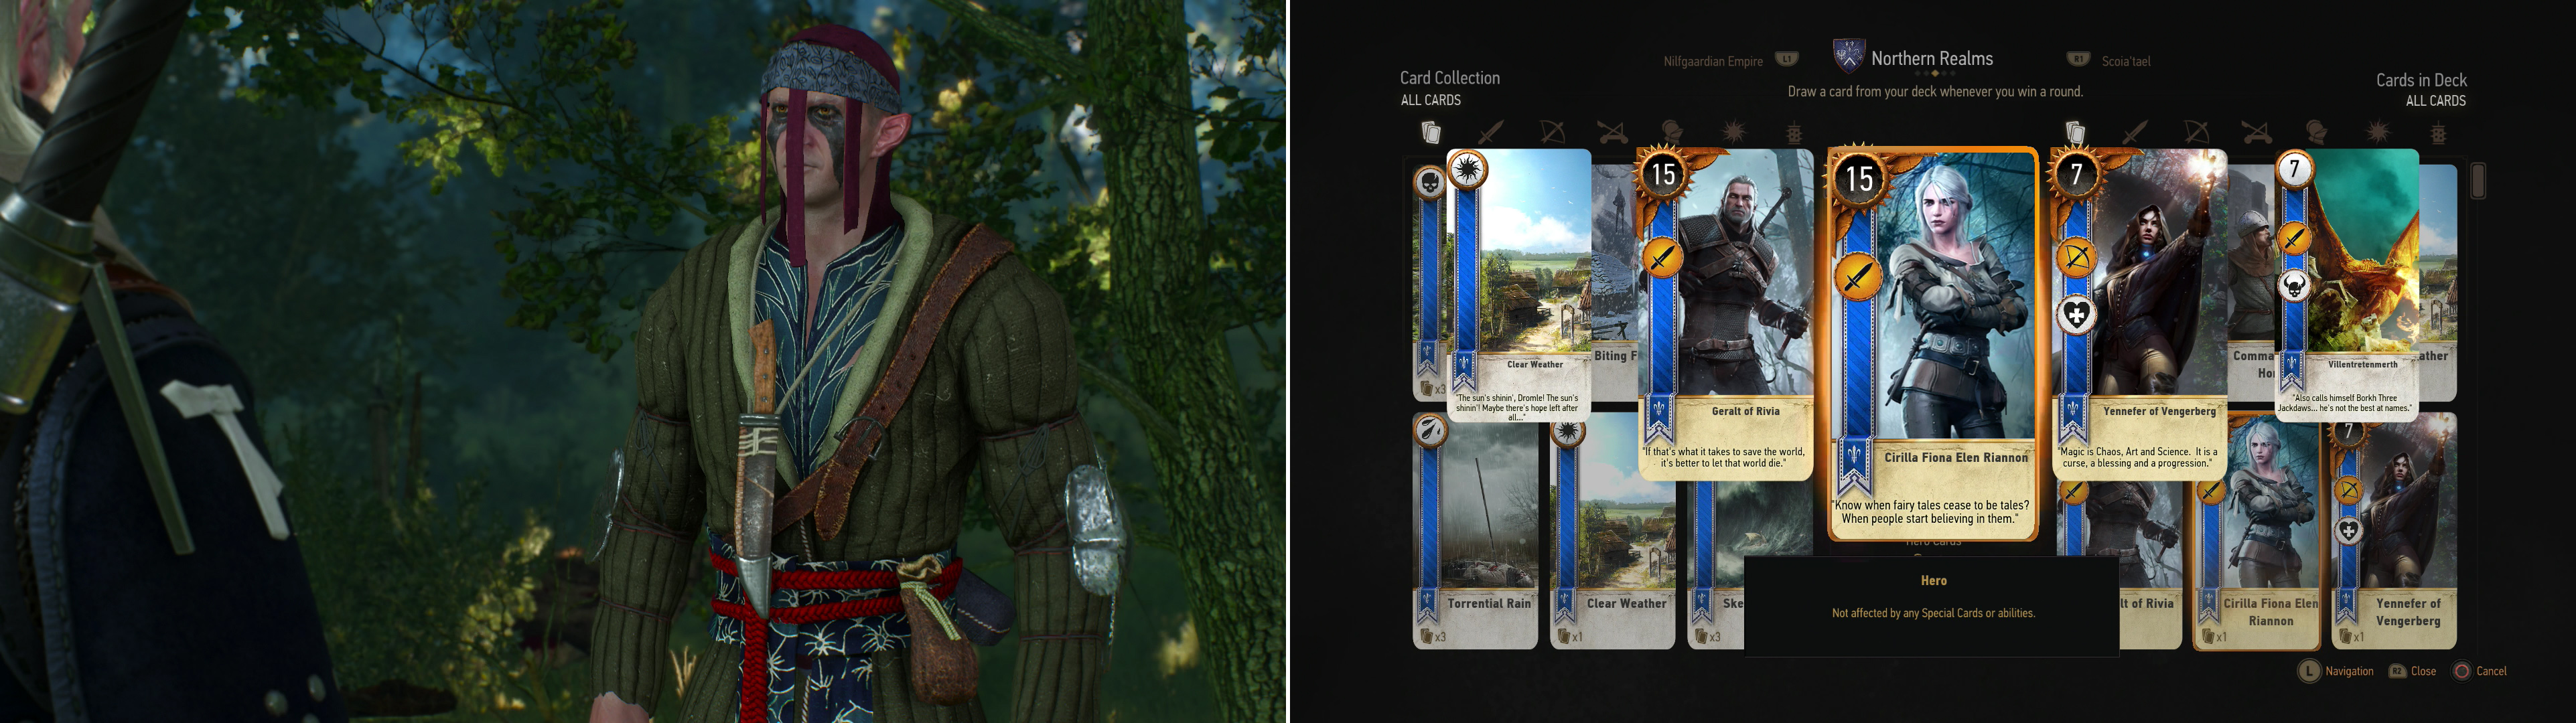 After hearing about him from Dijkstra, you'll be able to play Gwent with the Scoia'tael Merchant (left). Defeat him to win the Cirilla Fiona Elen Riannon Card (right).